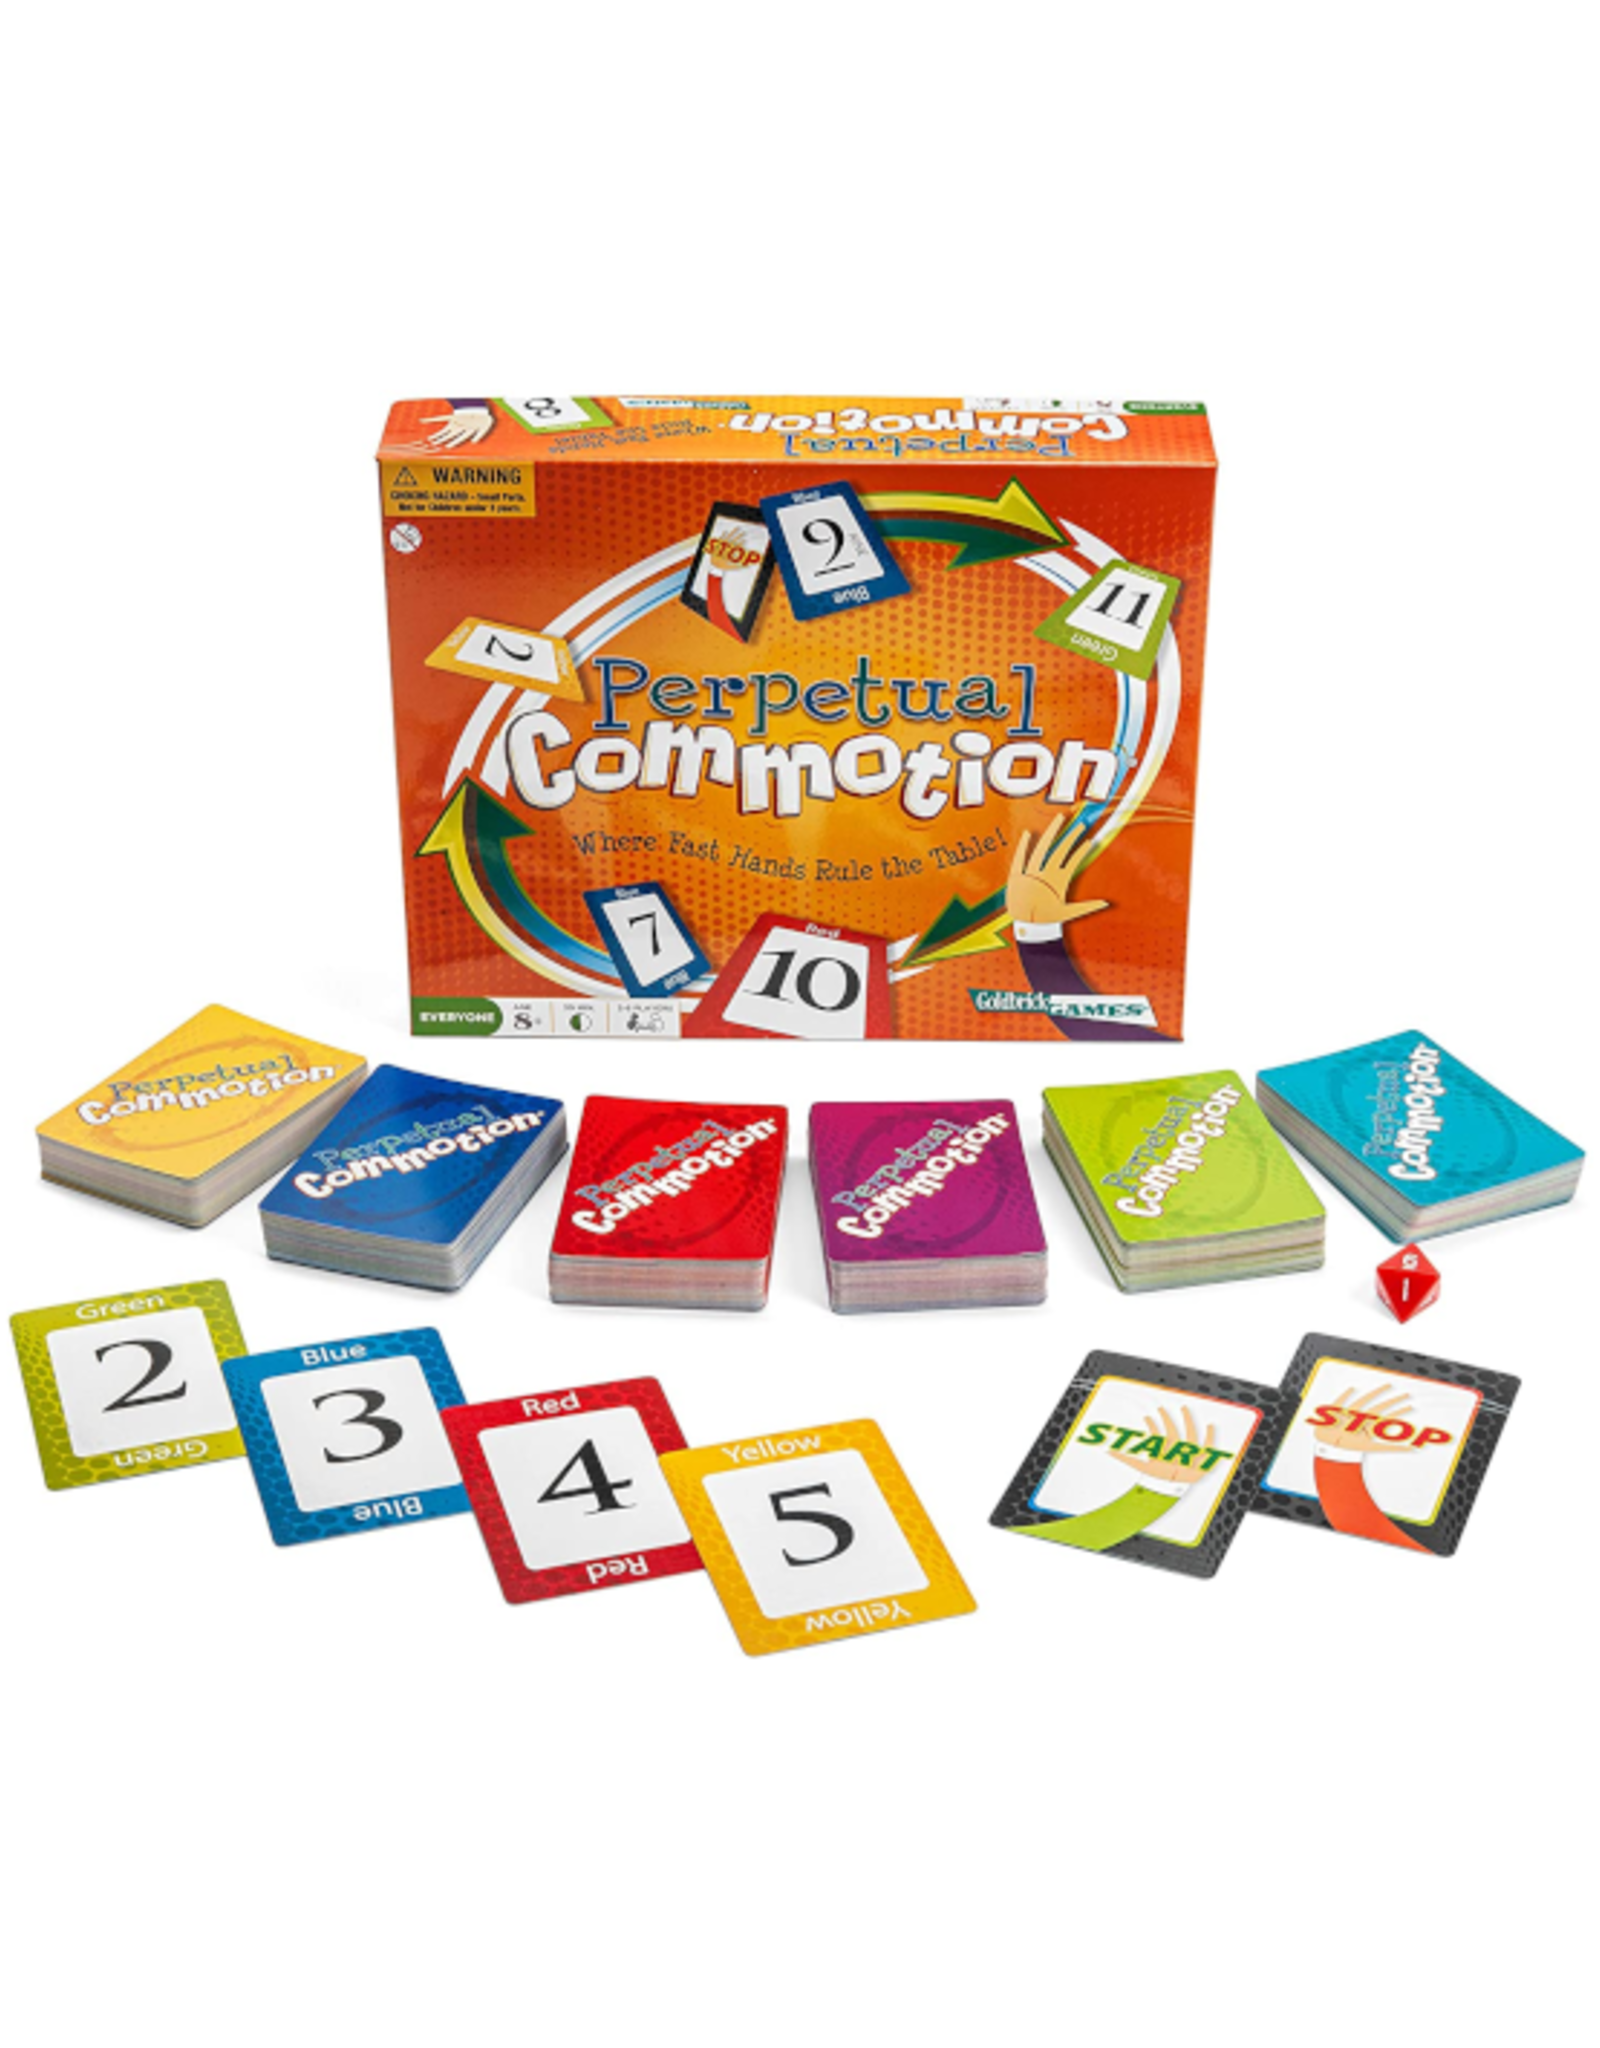 Goldbrick Games - Perpetual Commotion